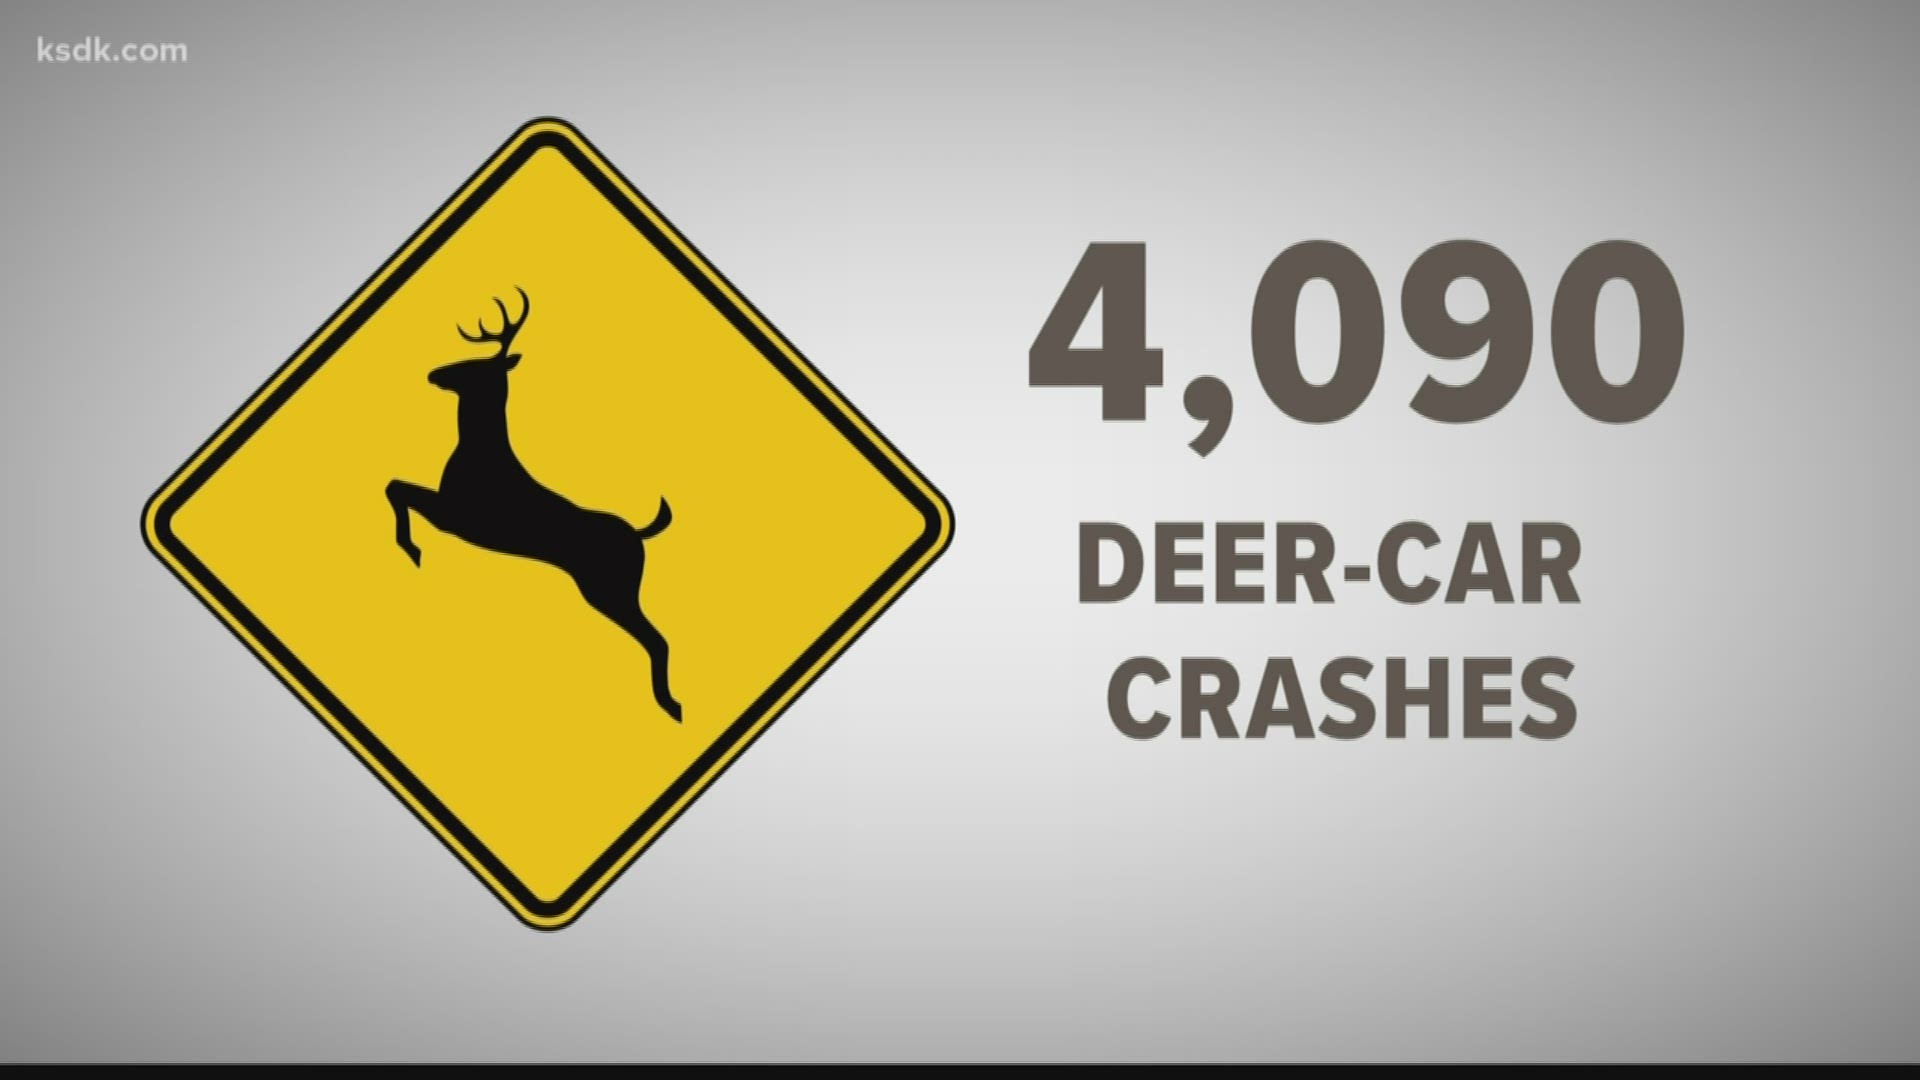 These are the routes where deer-car collisions are especially common.